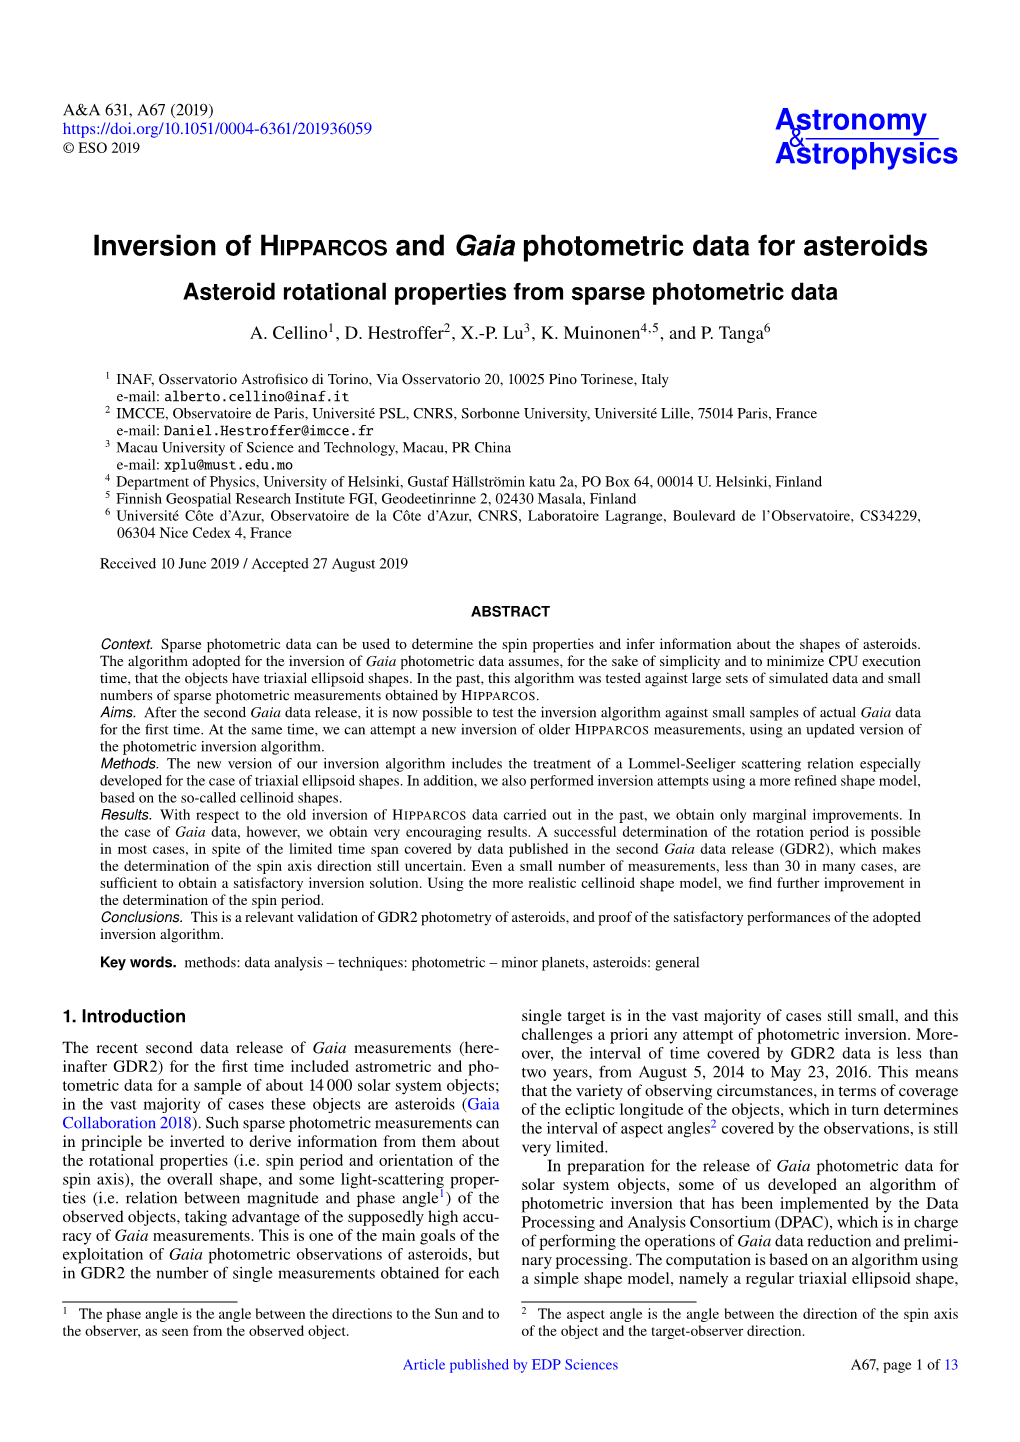 Inversion of HIPPARCOS and Gaia Photometric Data for Asteroids Asteroid Rotational Properties from Sparse Photometric Data A